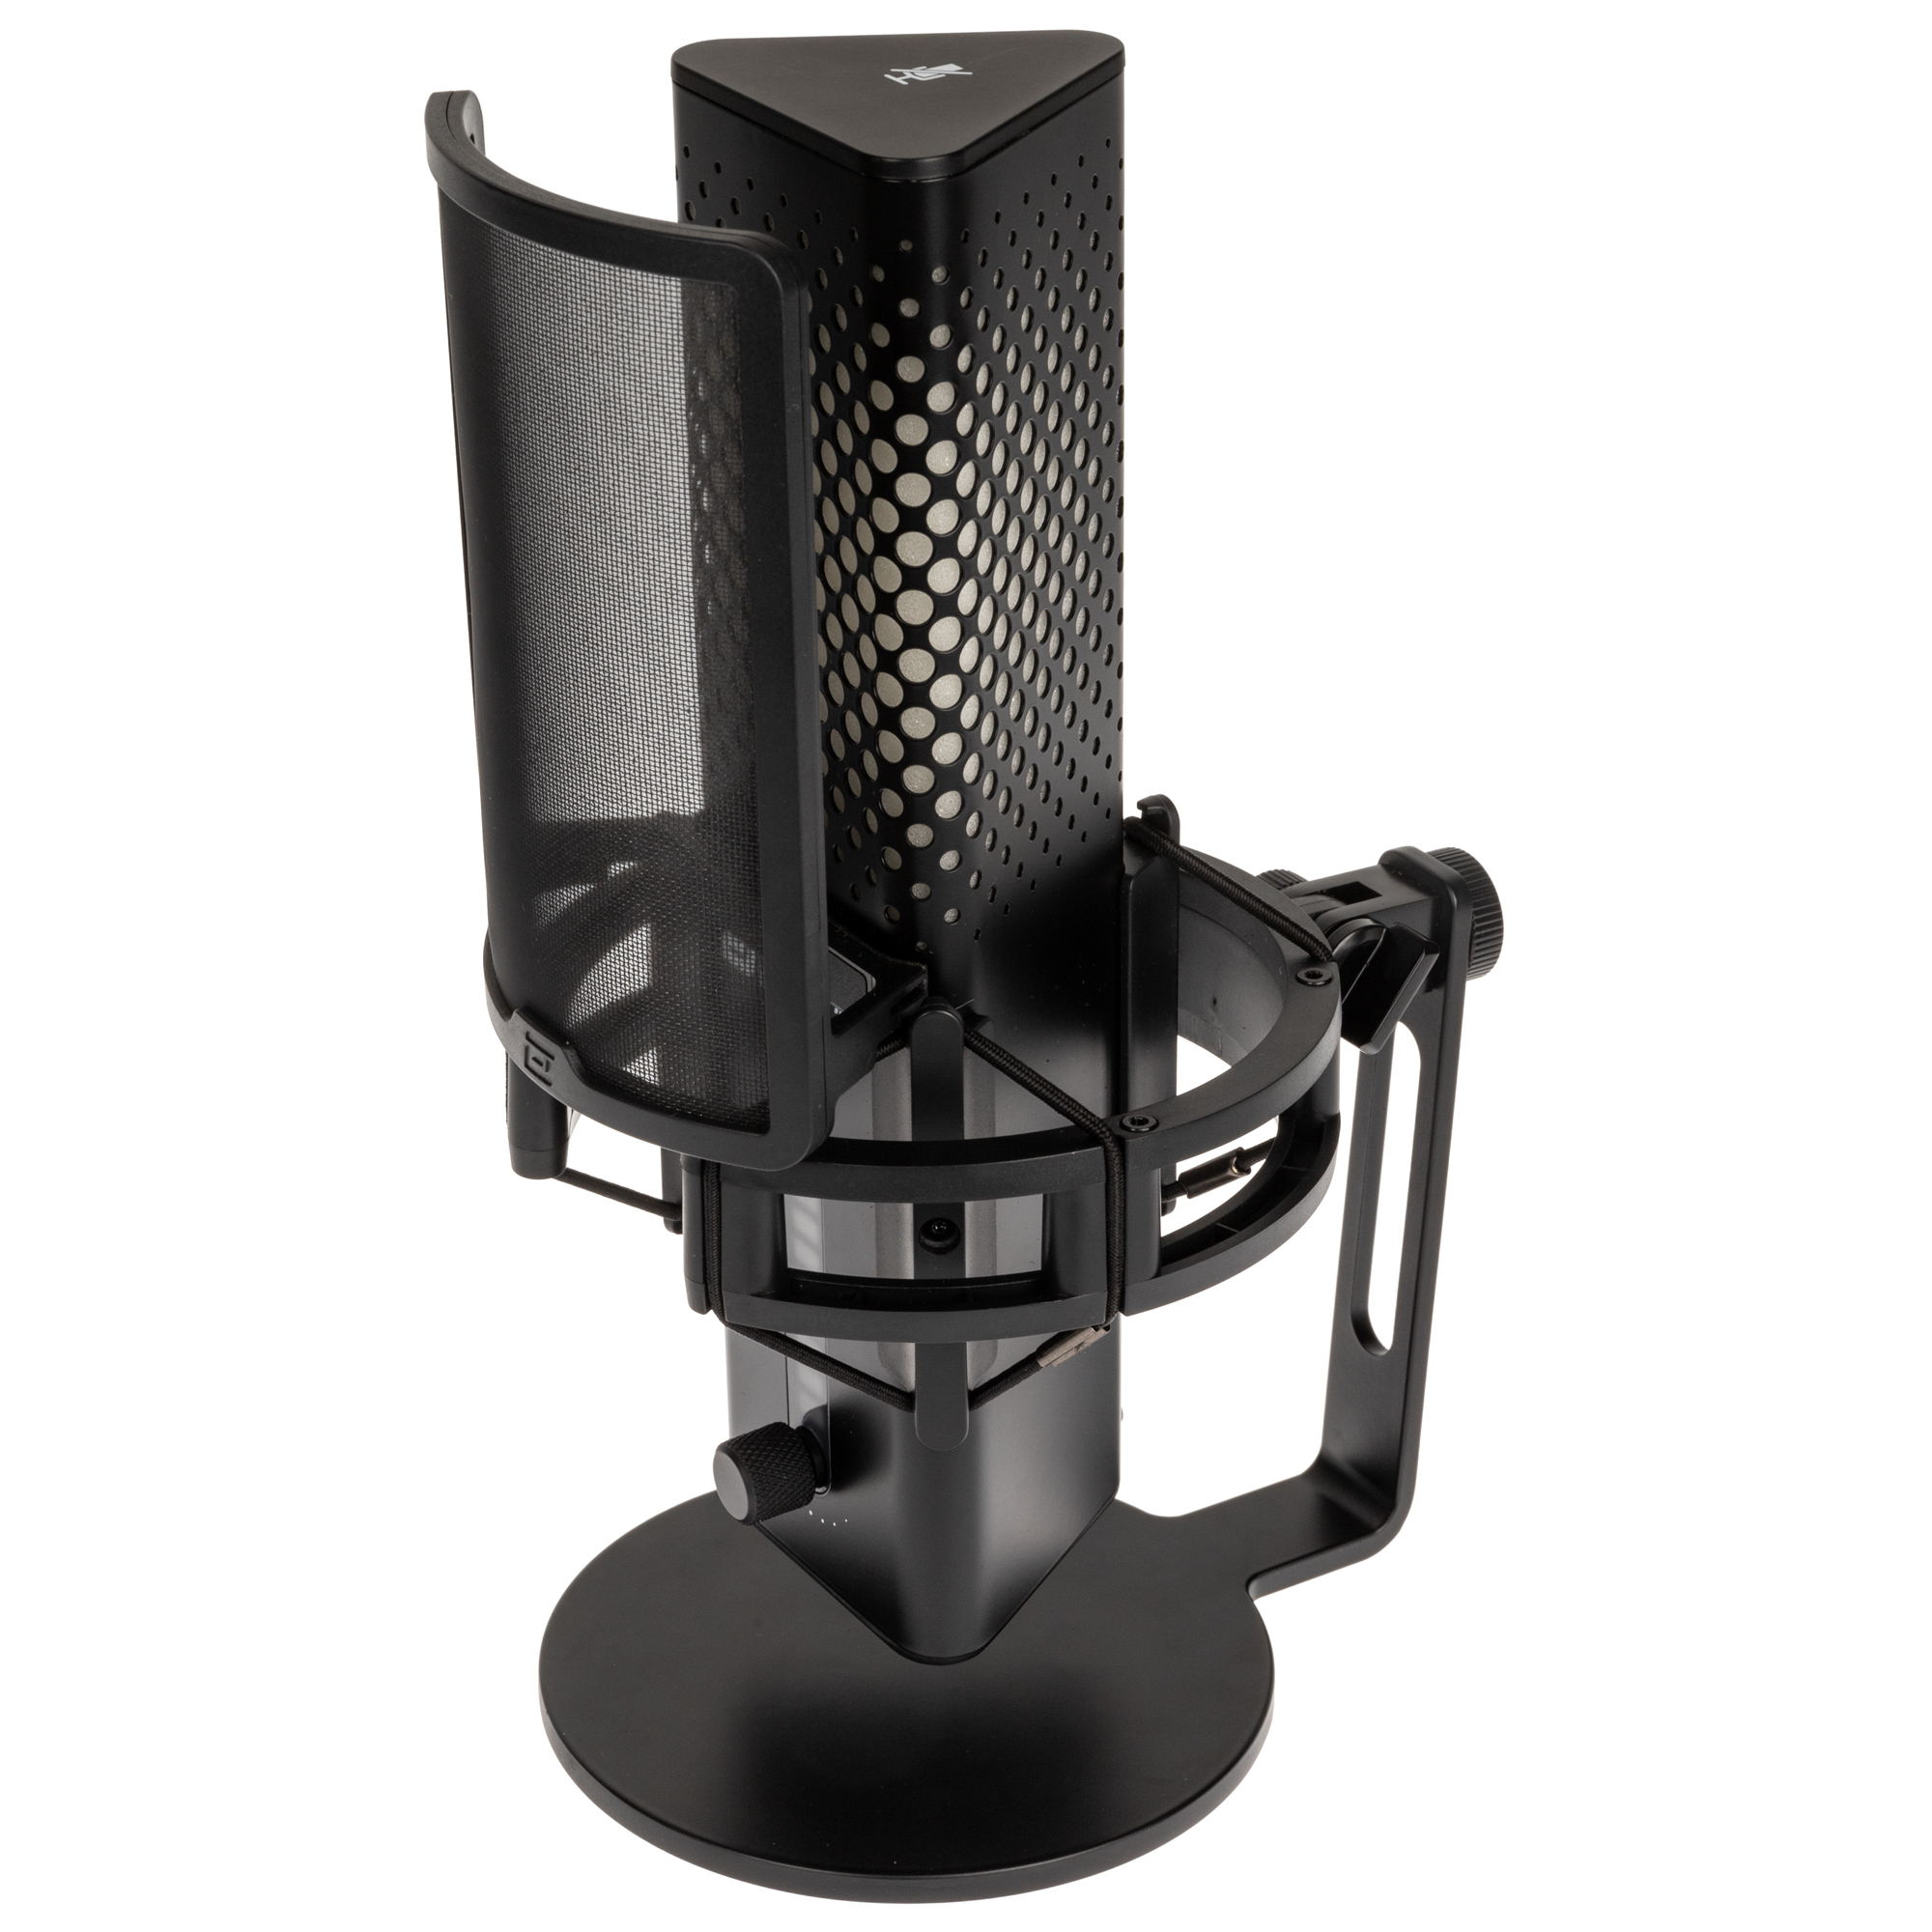 Endgame Gear - Endgame Gear XSTRM RGB USB Microphone with Shock Mount and Pop Filter - Black (EGG-XST-BLK)